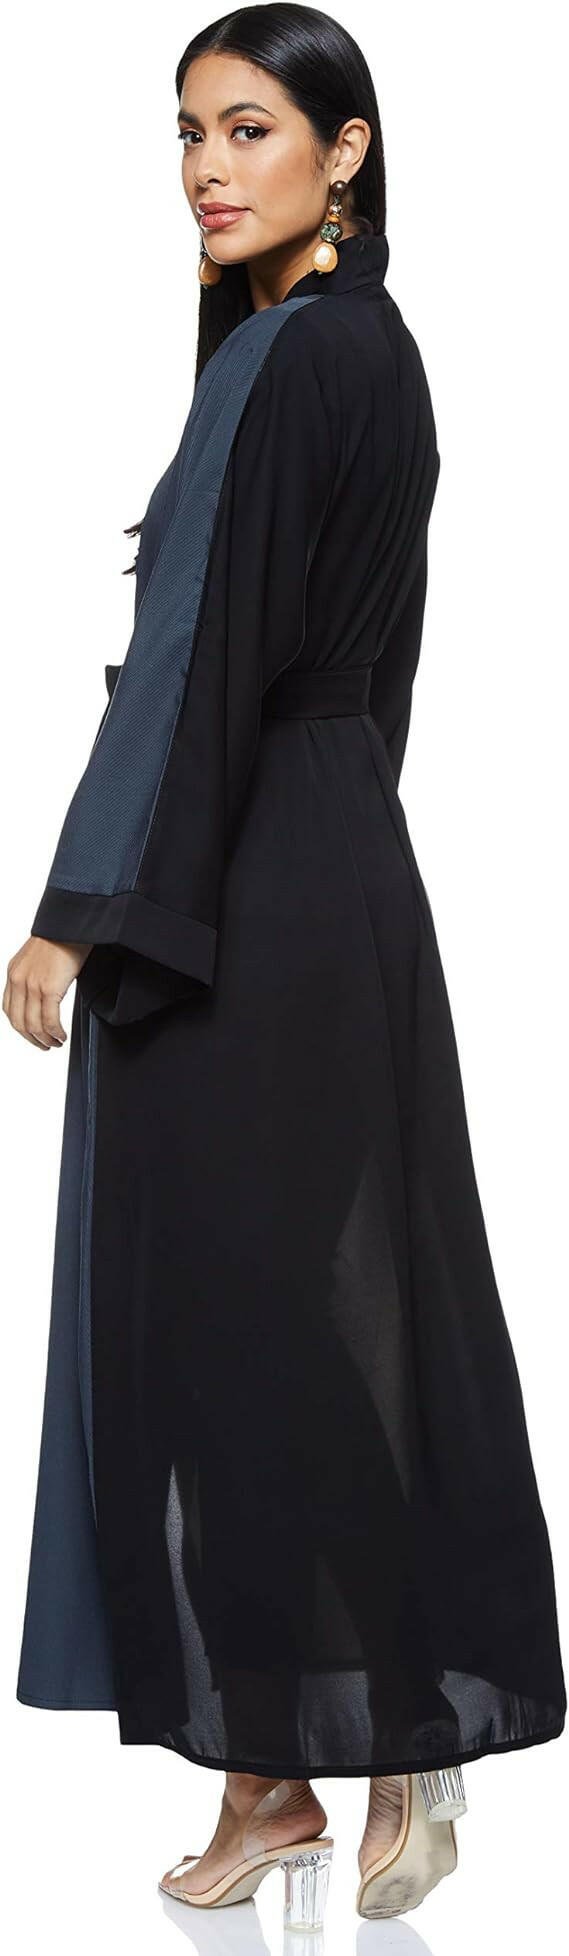 Women's Abaya Made With Fine Fabric, Comes With Matching Hijab Ethnic Wear